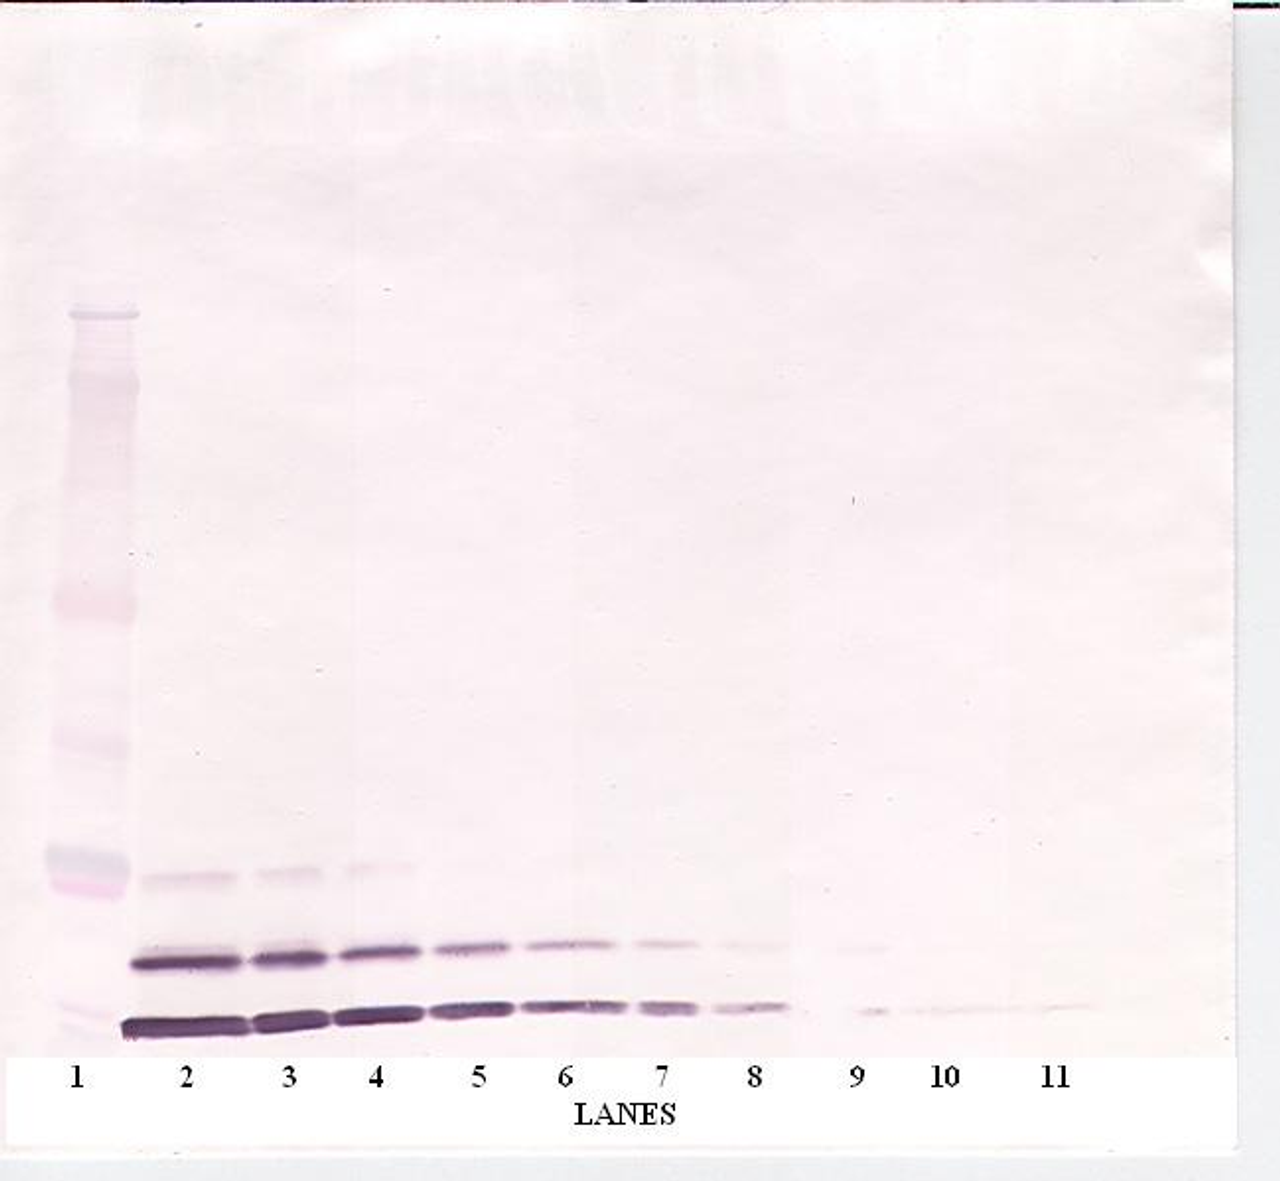 To detect mIGF-I by Western Blot analysis this antibody can be used at a concentration of 0.1 - 0.2 ug/ml. Used in conjunction with compatible secondary reagents the detection limit for recombinant mIGF-I is 1.5 - 3.0 ng/lane, under either reducing or non-reducing conditions.